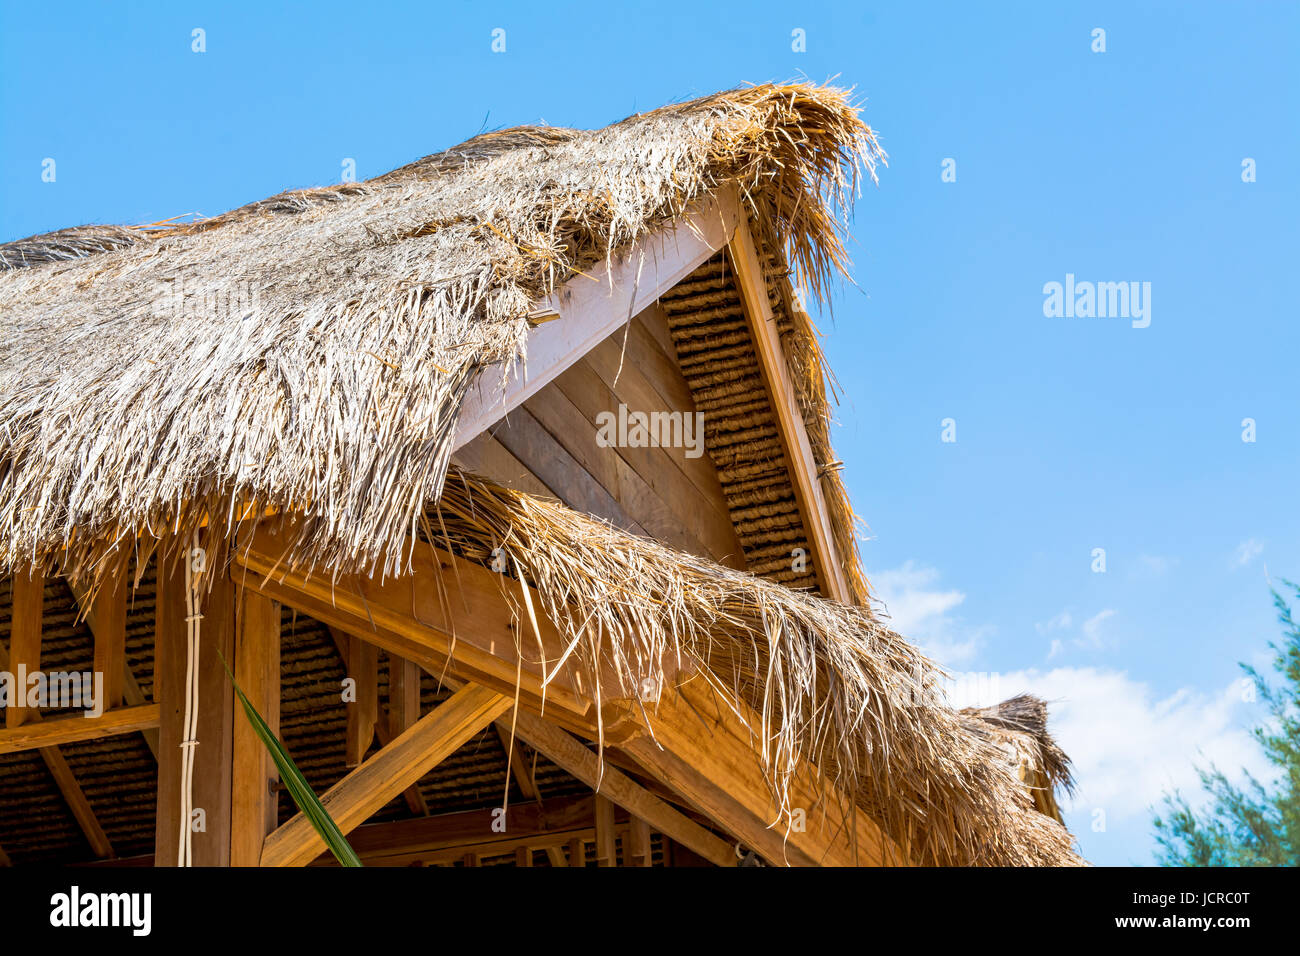 Low Angle View of Traditional thatched roof House Banque D'Images